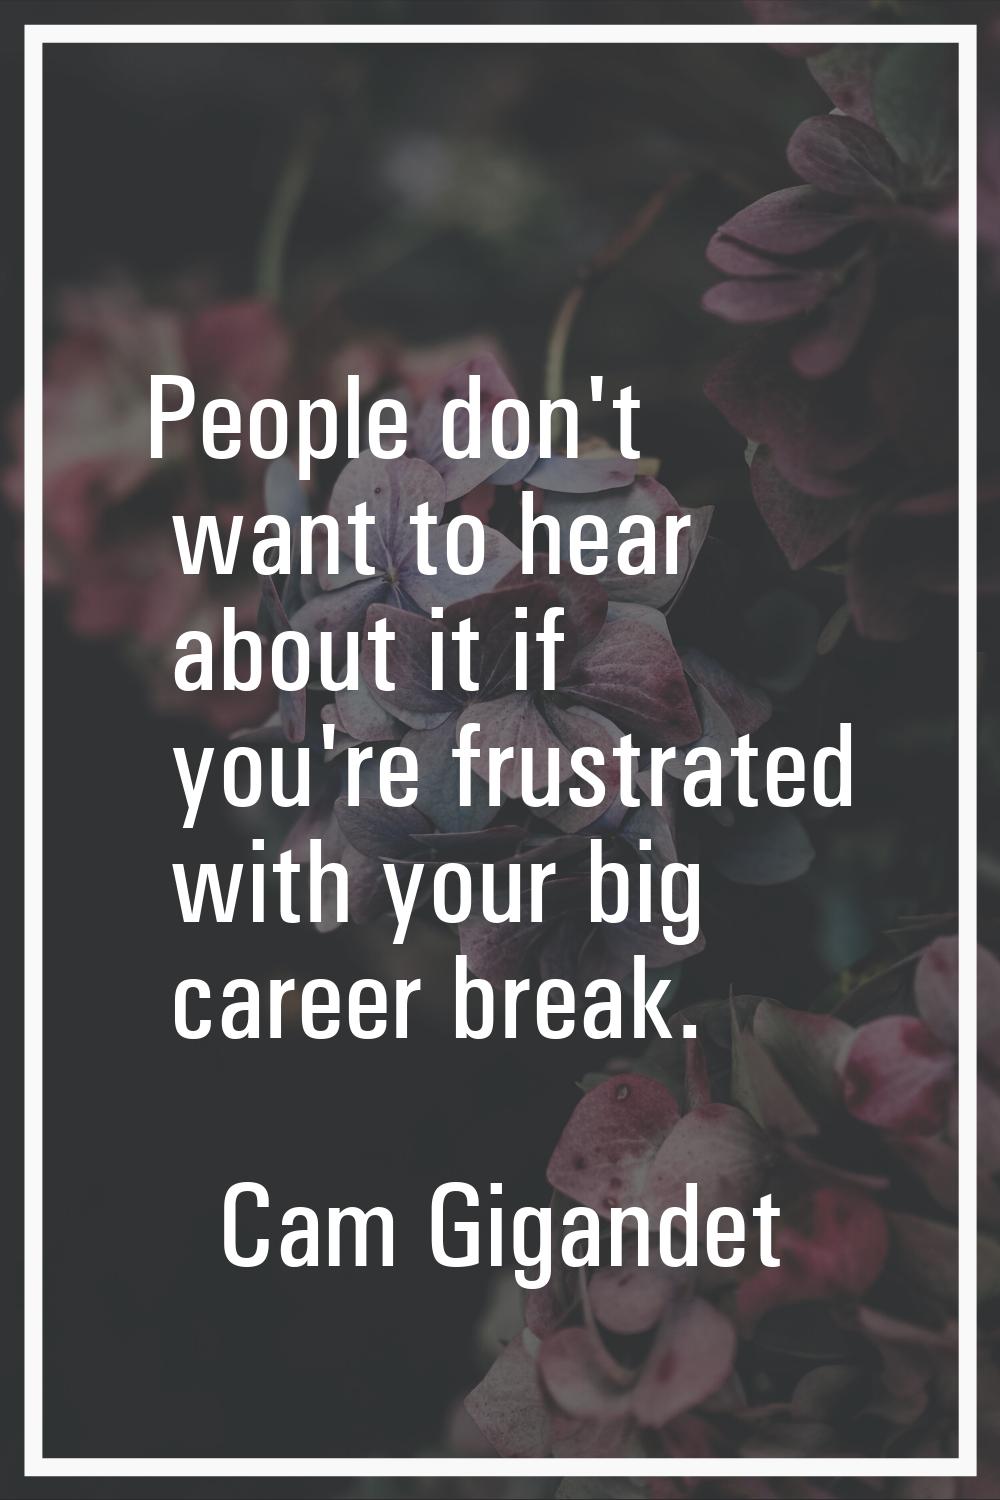 People don't want to hear about it if you're frustrated with your big career break.